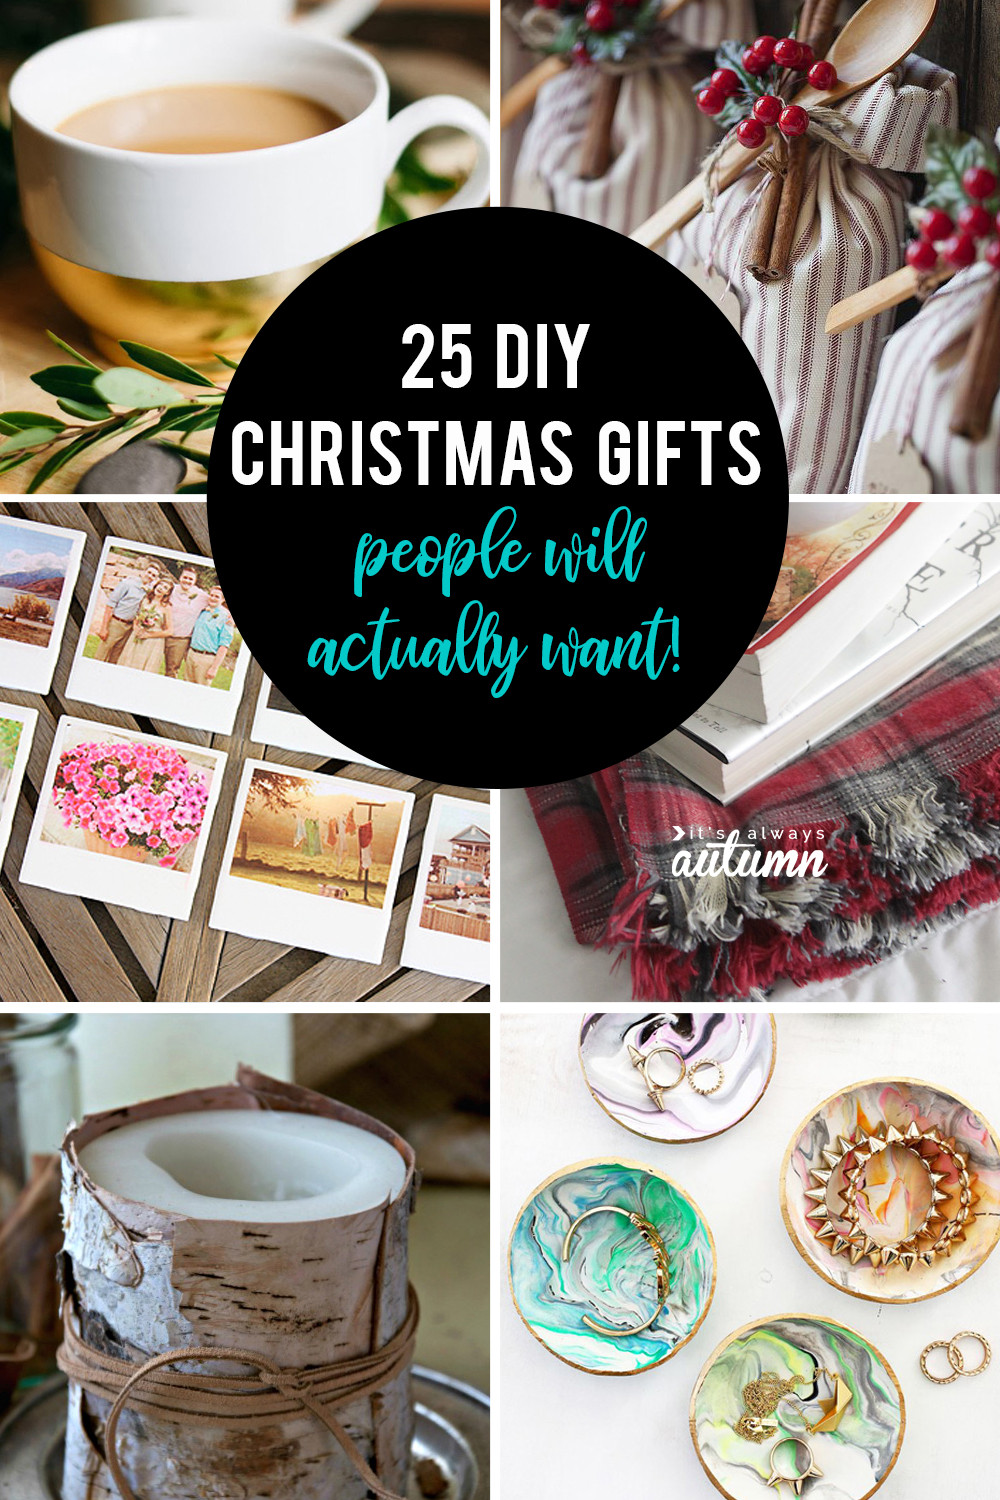 DIY Christmas Gifts
 25 amazing DIY ts people will actually want It s